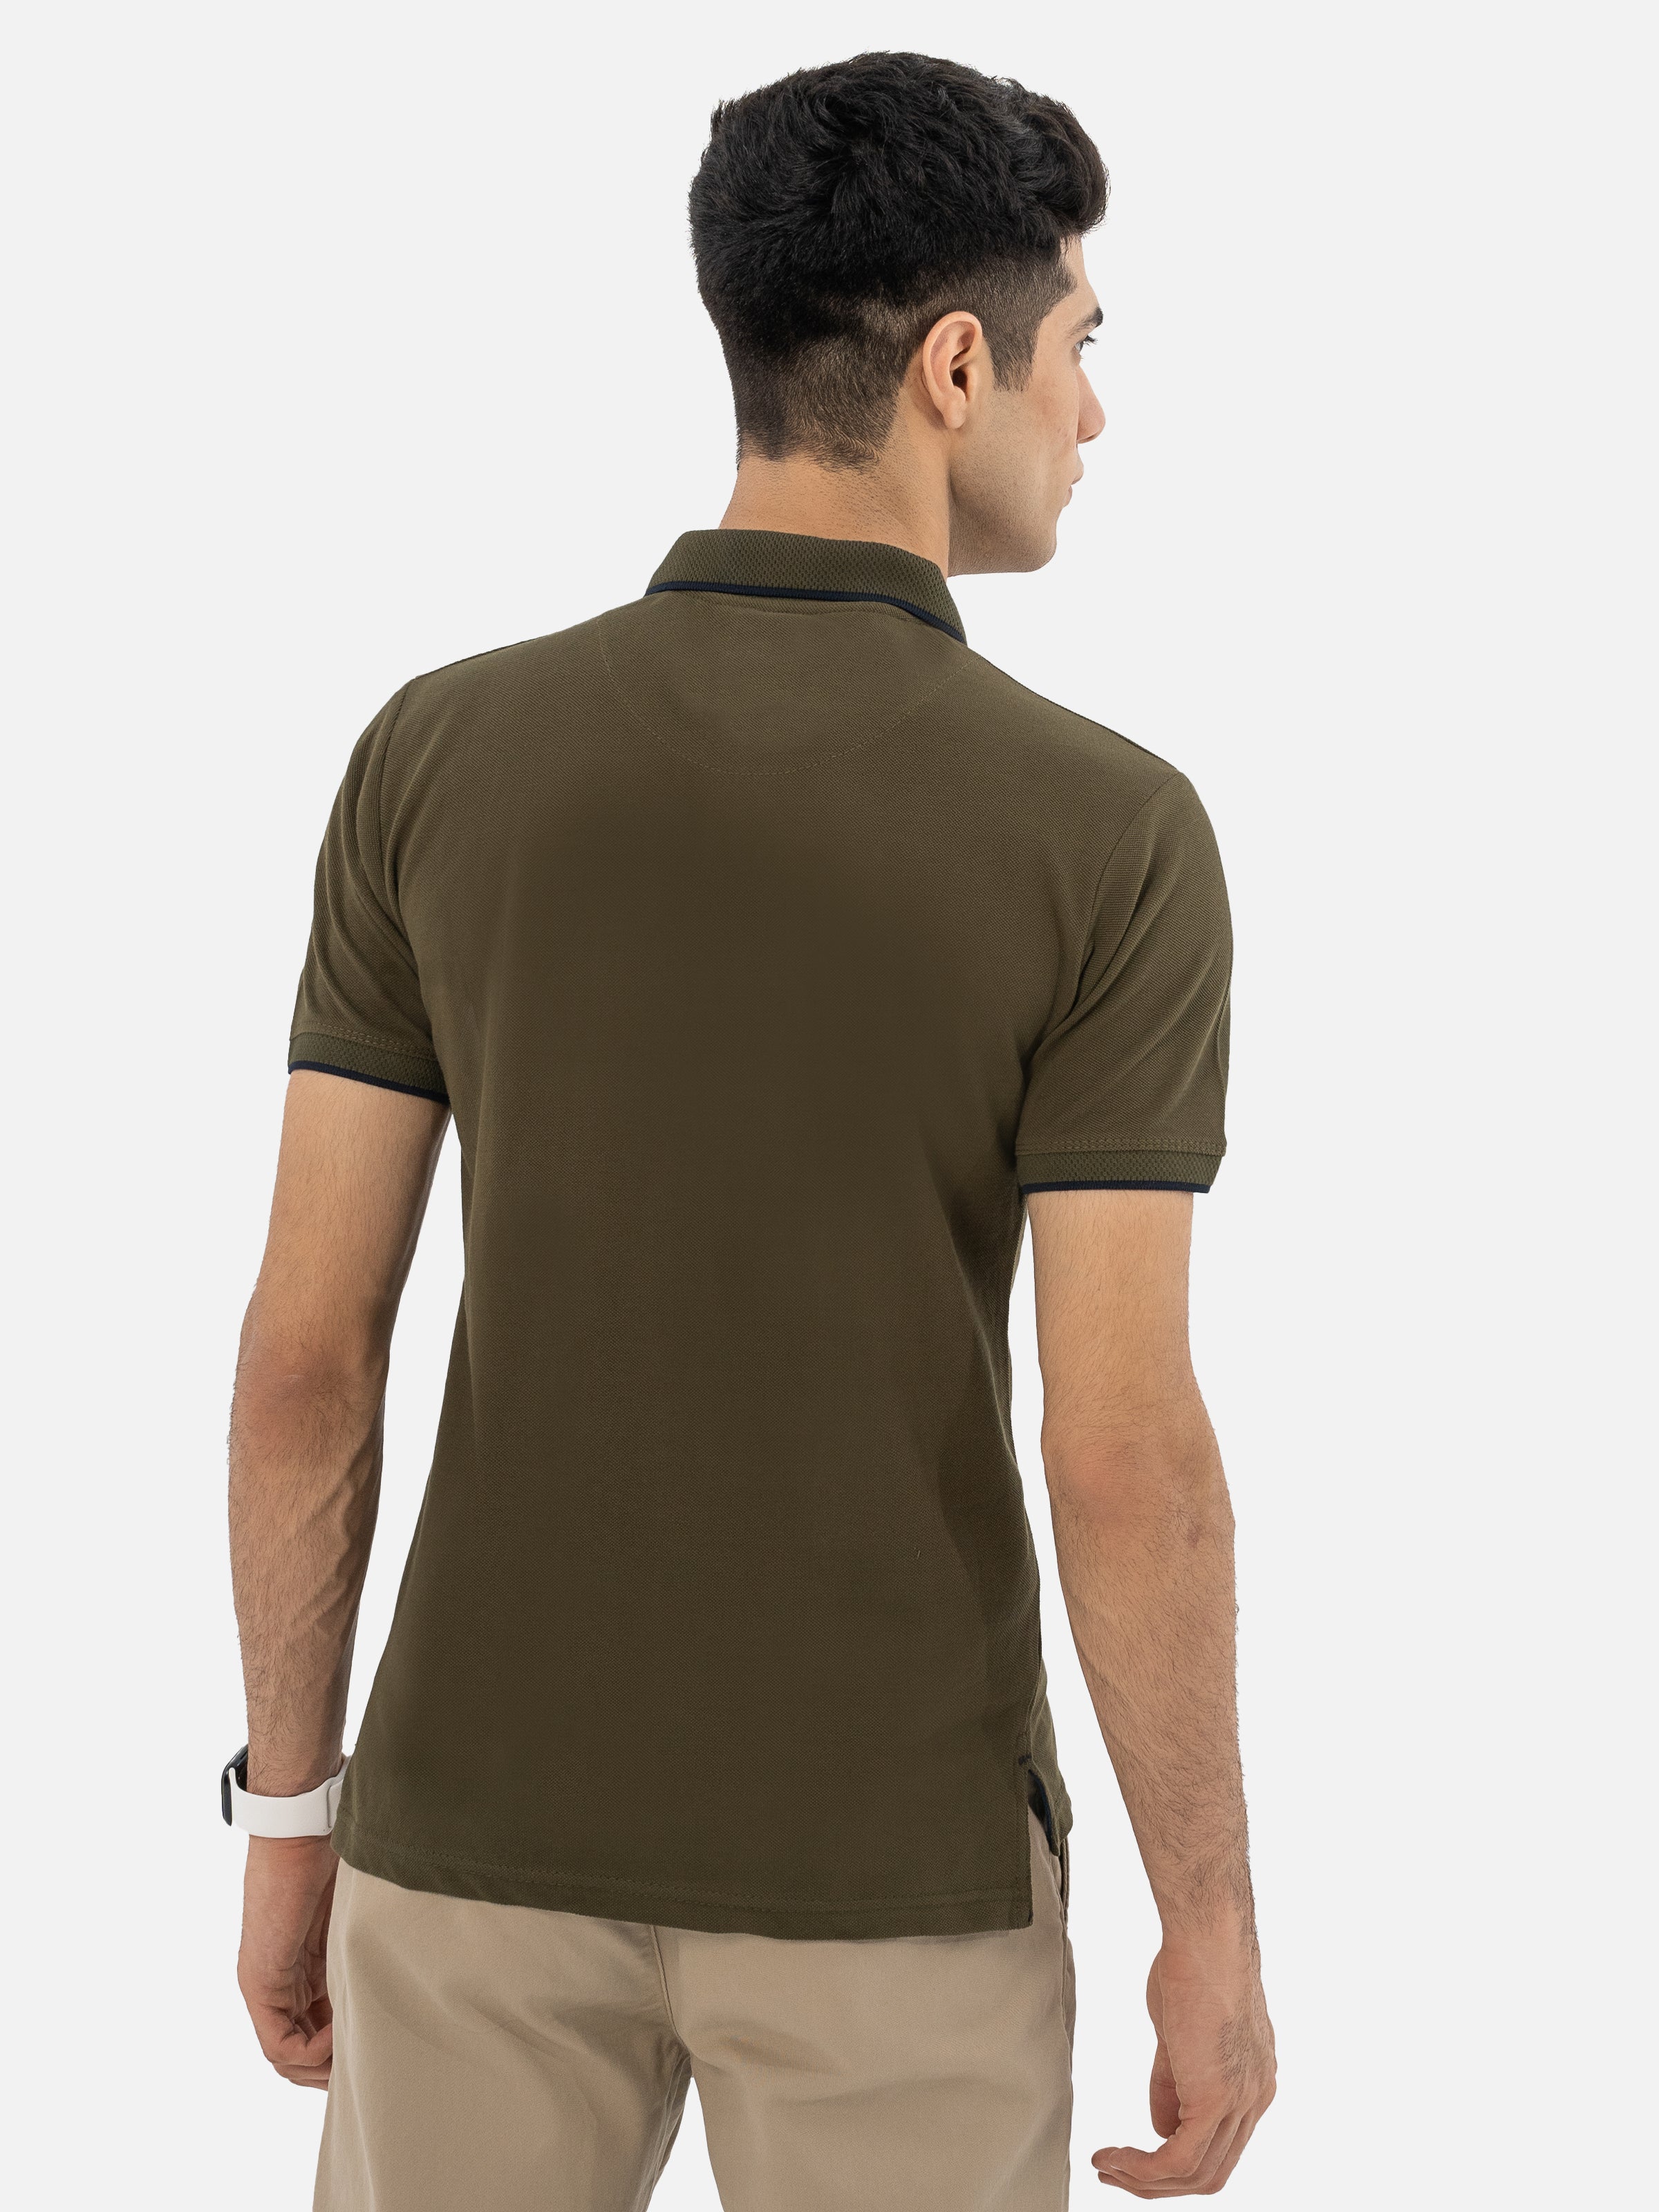 T SHIRT POLO OLIVE